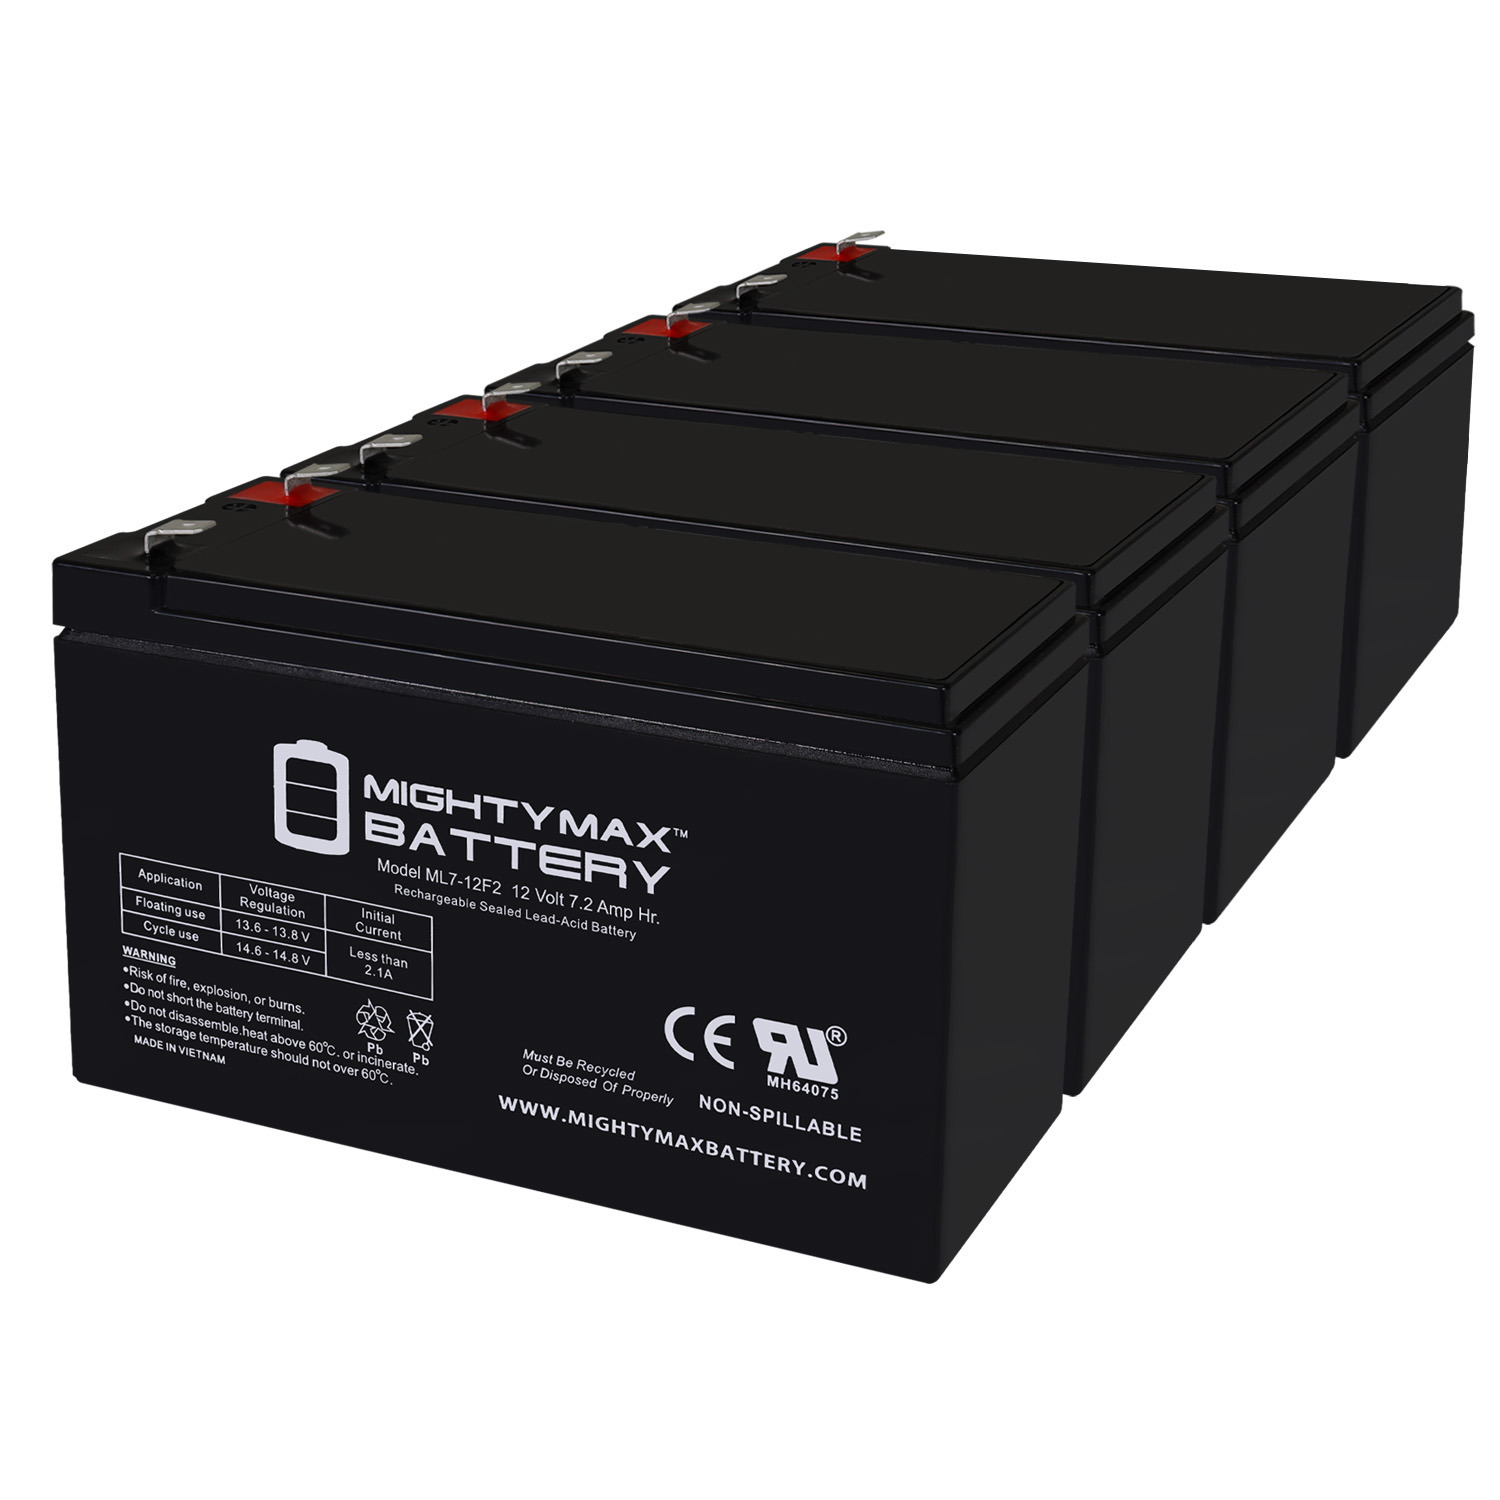 12V 7Ah F2 Replacement Battery for APC SMT1000RM2UTW - 4 Pack